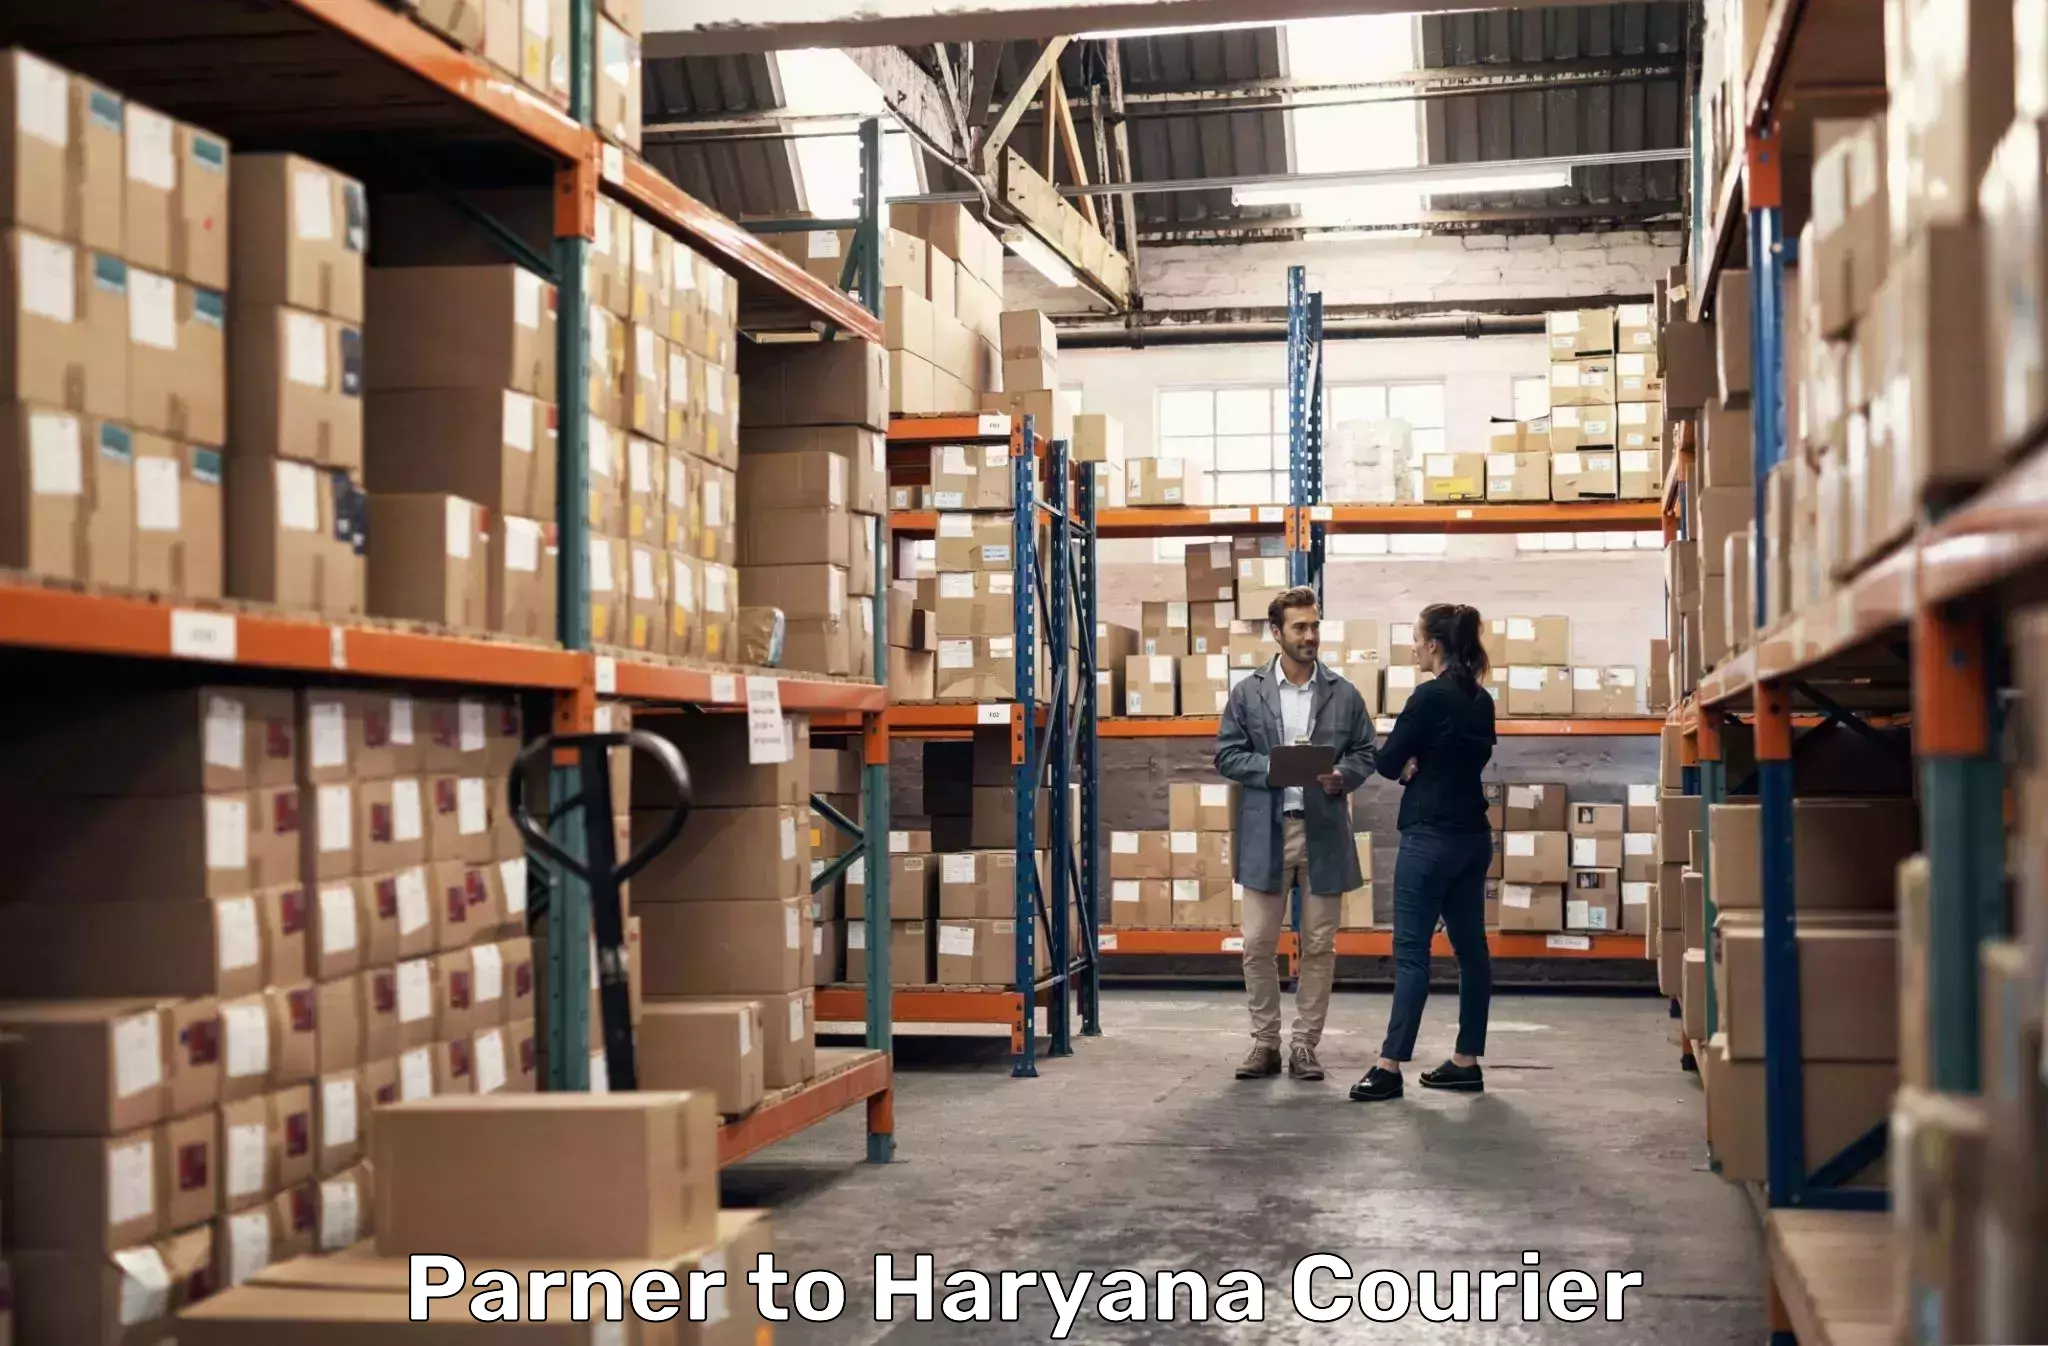 Courier service efficiency in Parner to Chaudhary Charan Singh Haryana Agricultural University Hisar